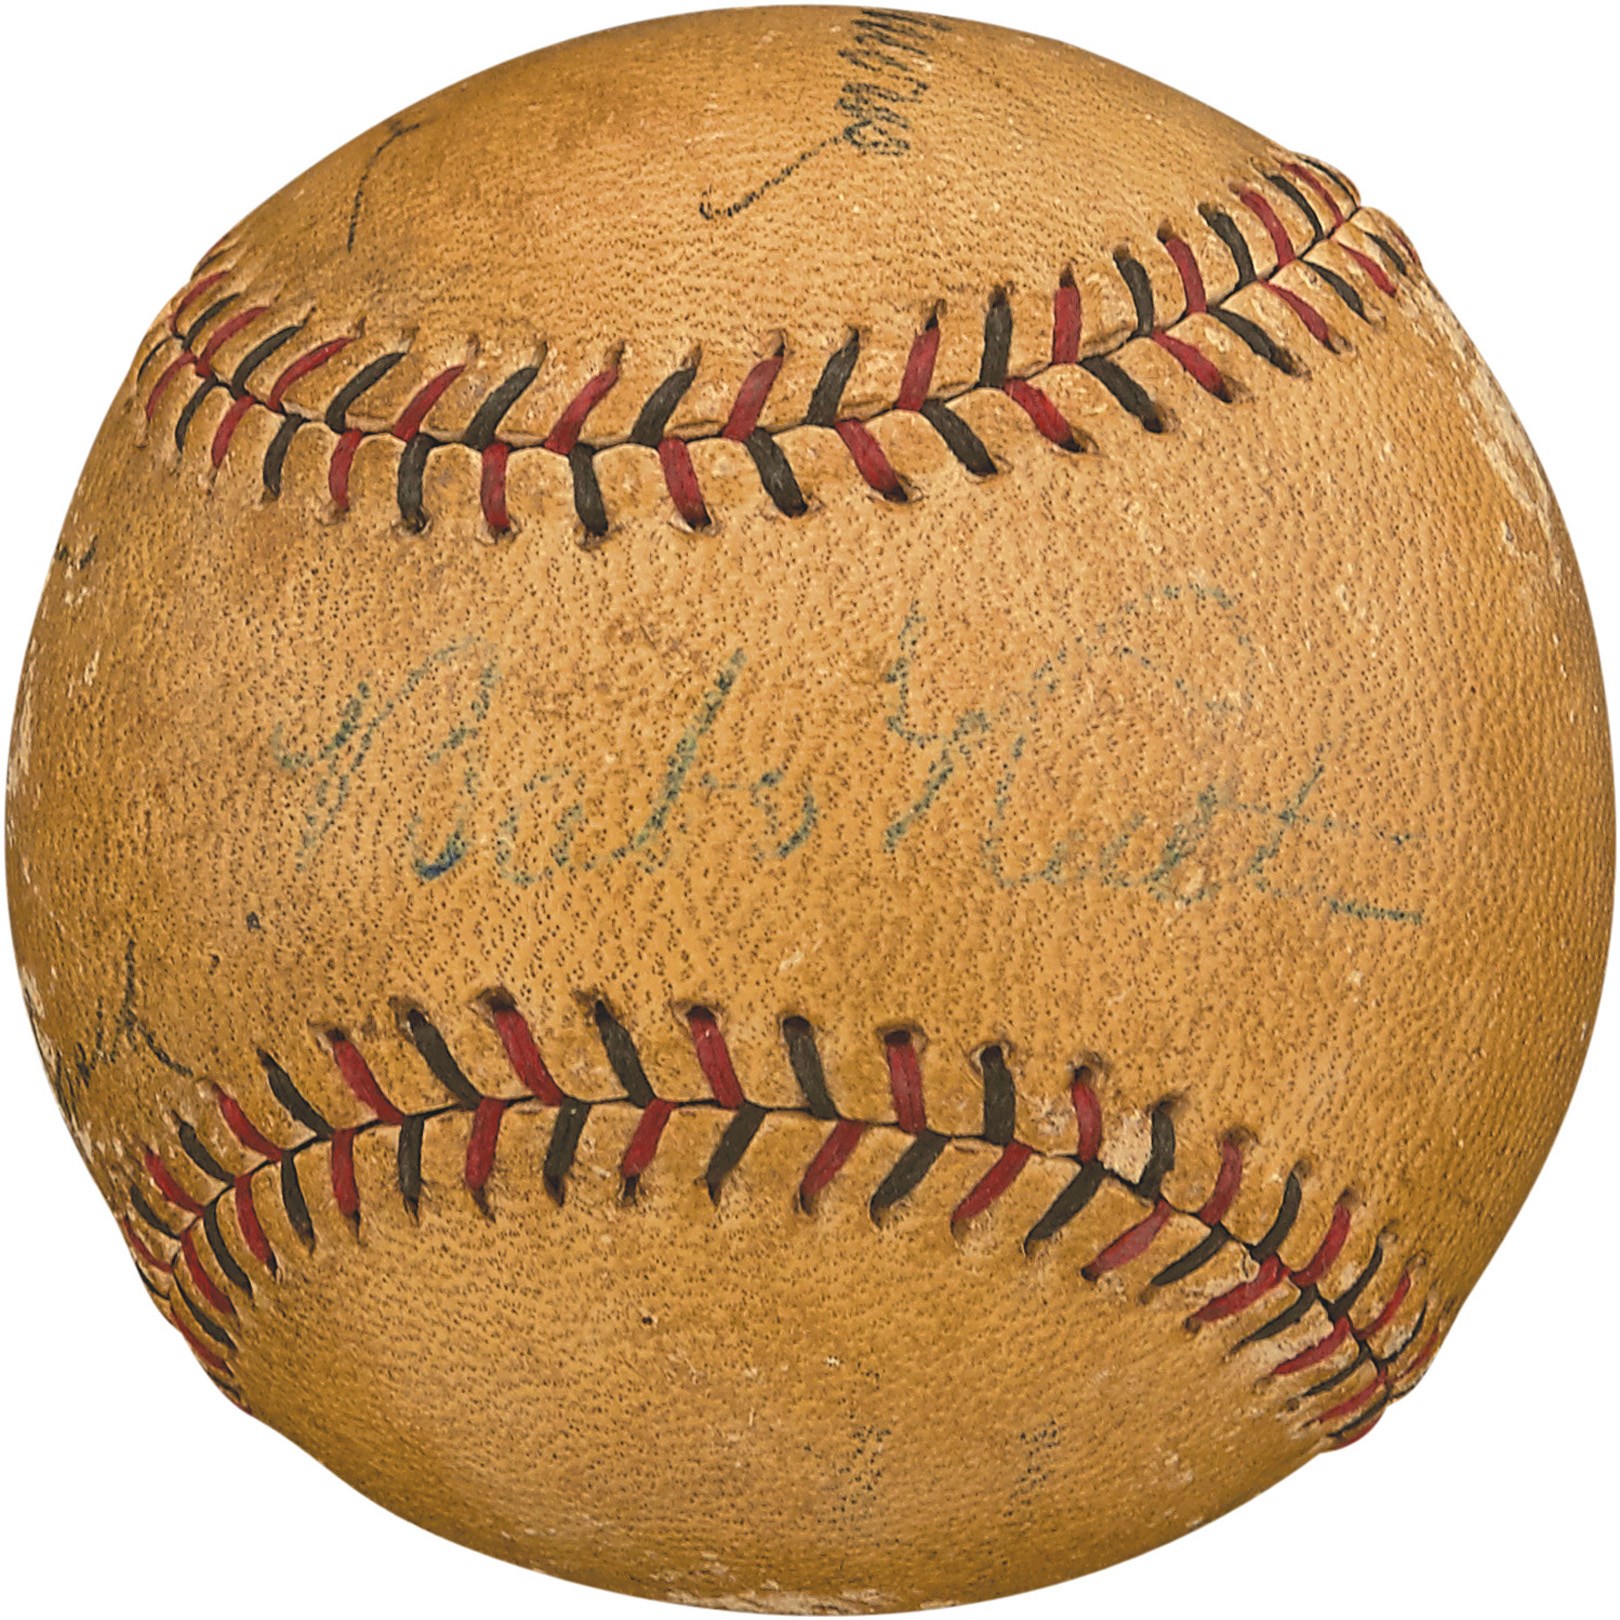 - 1930 World Series Teams-Signed Foul Ball w/Babe Ruth - Newspaper Article Provenance (PSA)